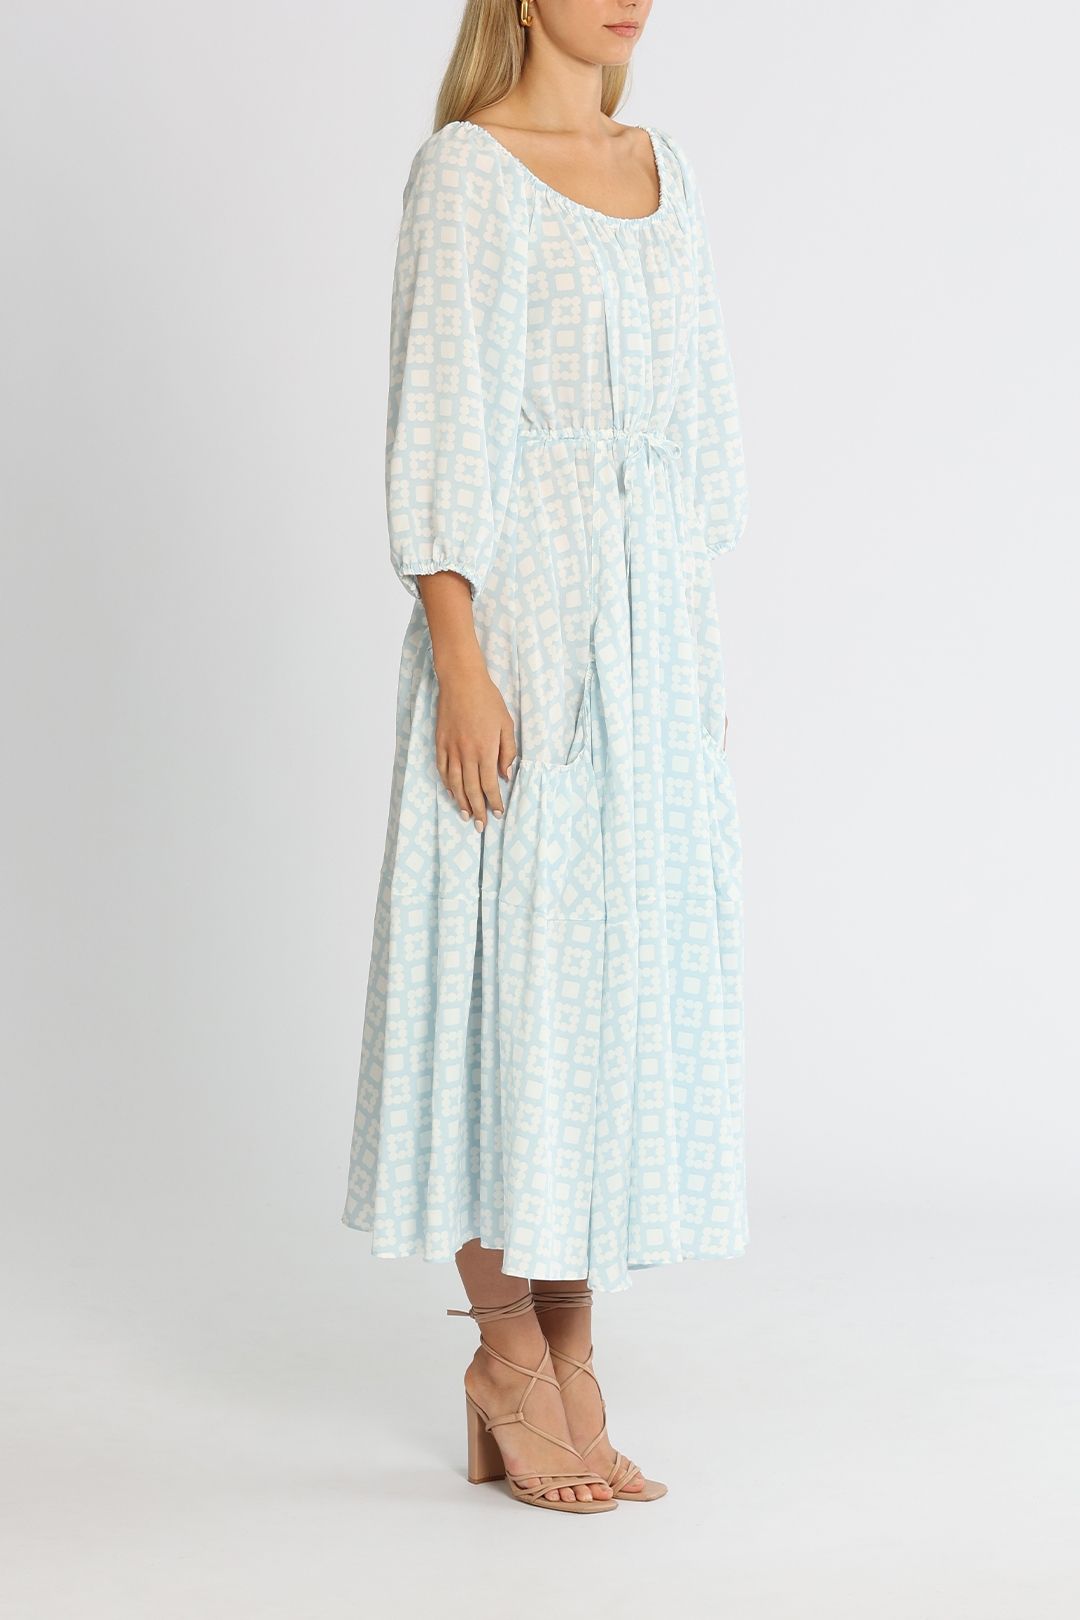 Brave and True Kindred Puff Sleeve Dress Code Blue Midi